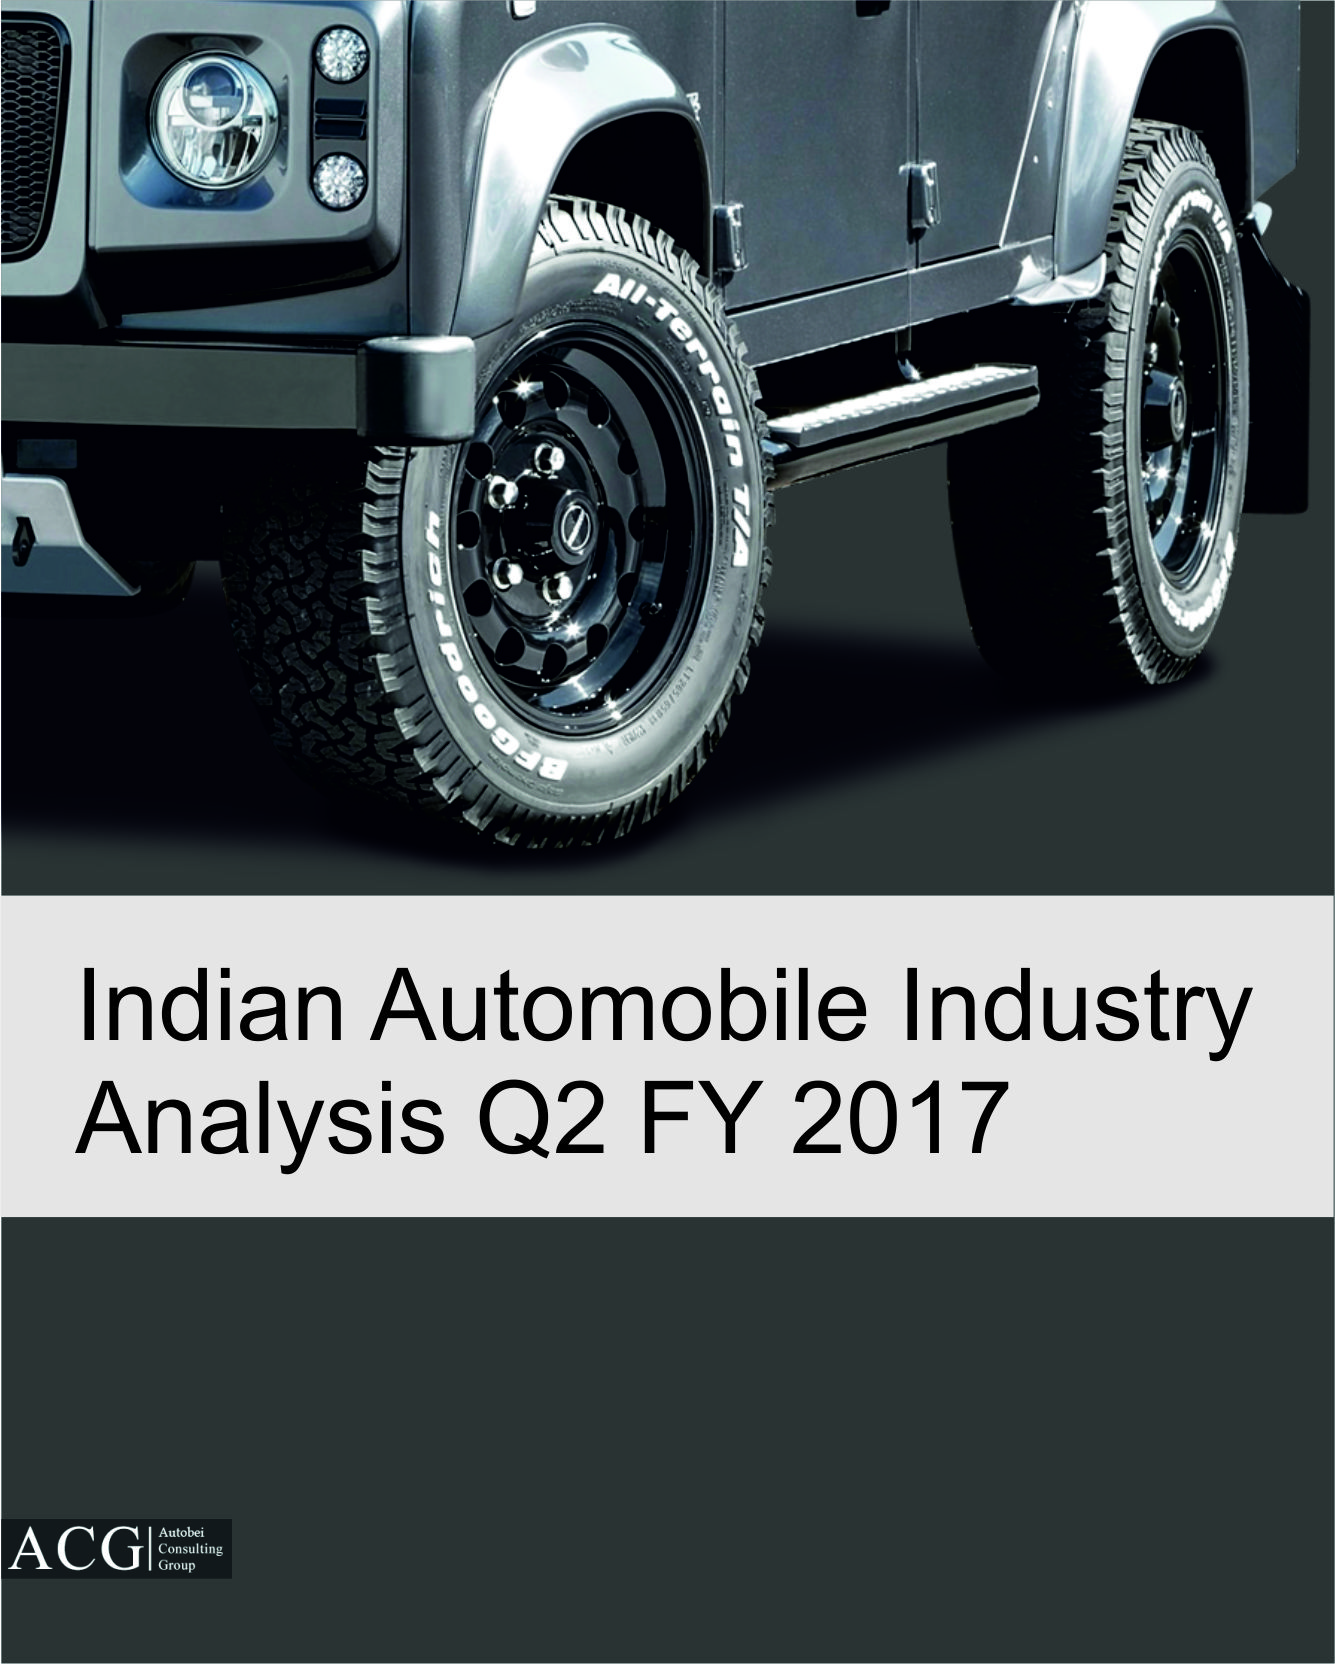 Indian Automobile Industry Report Q2 FY 2017